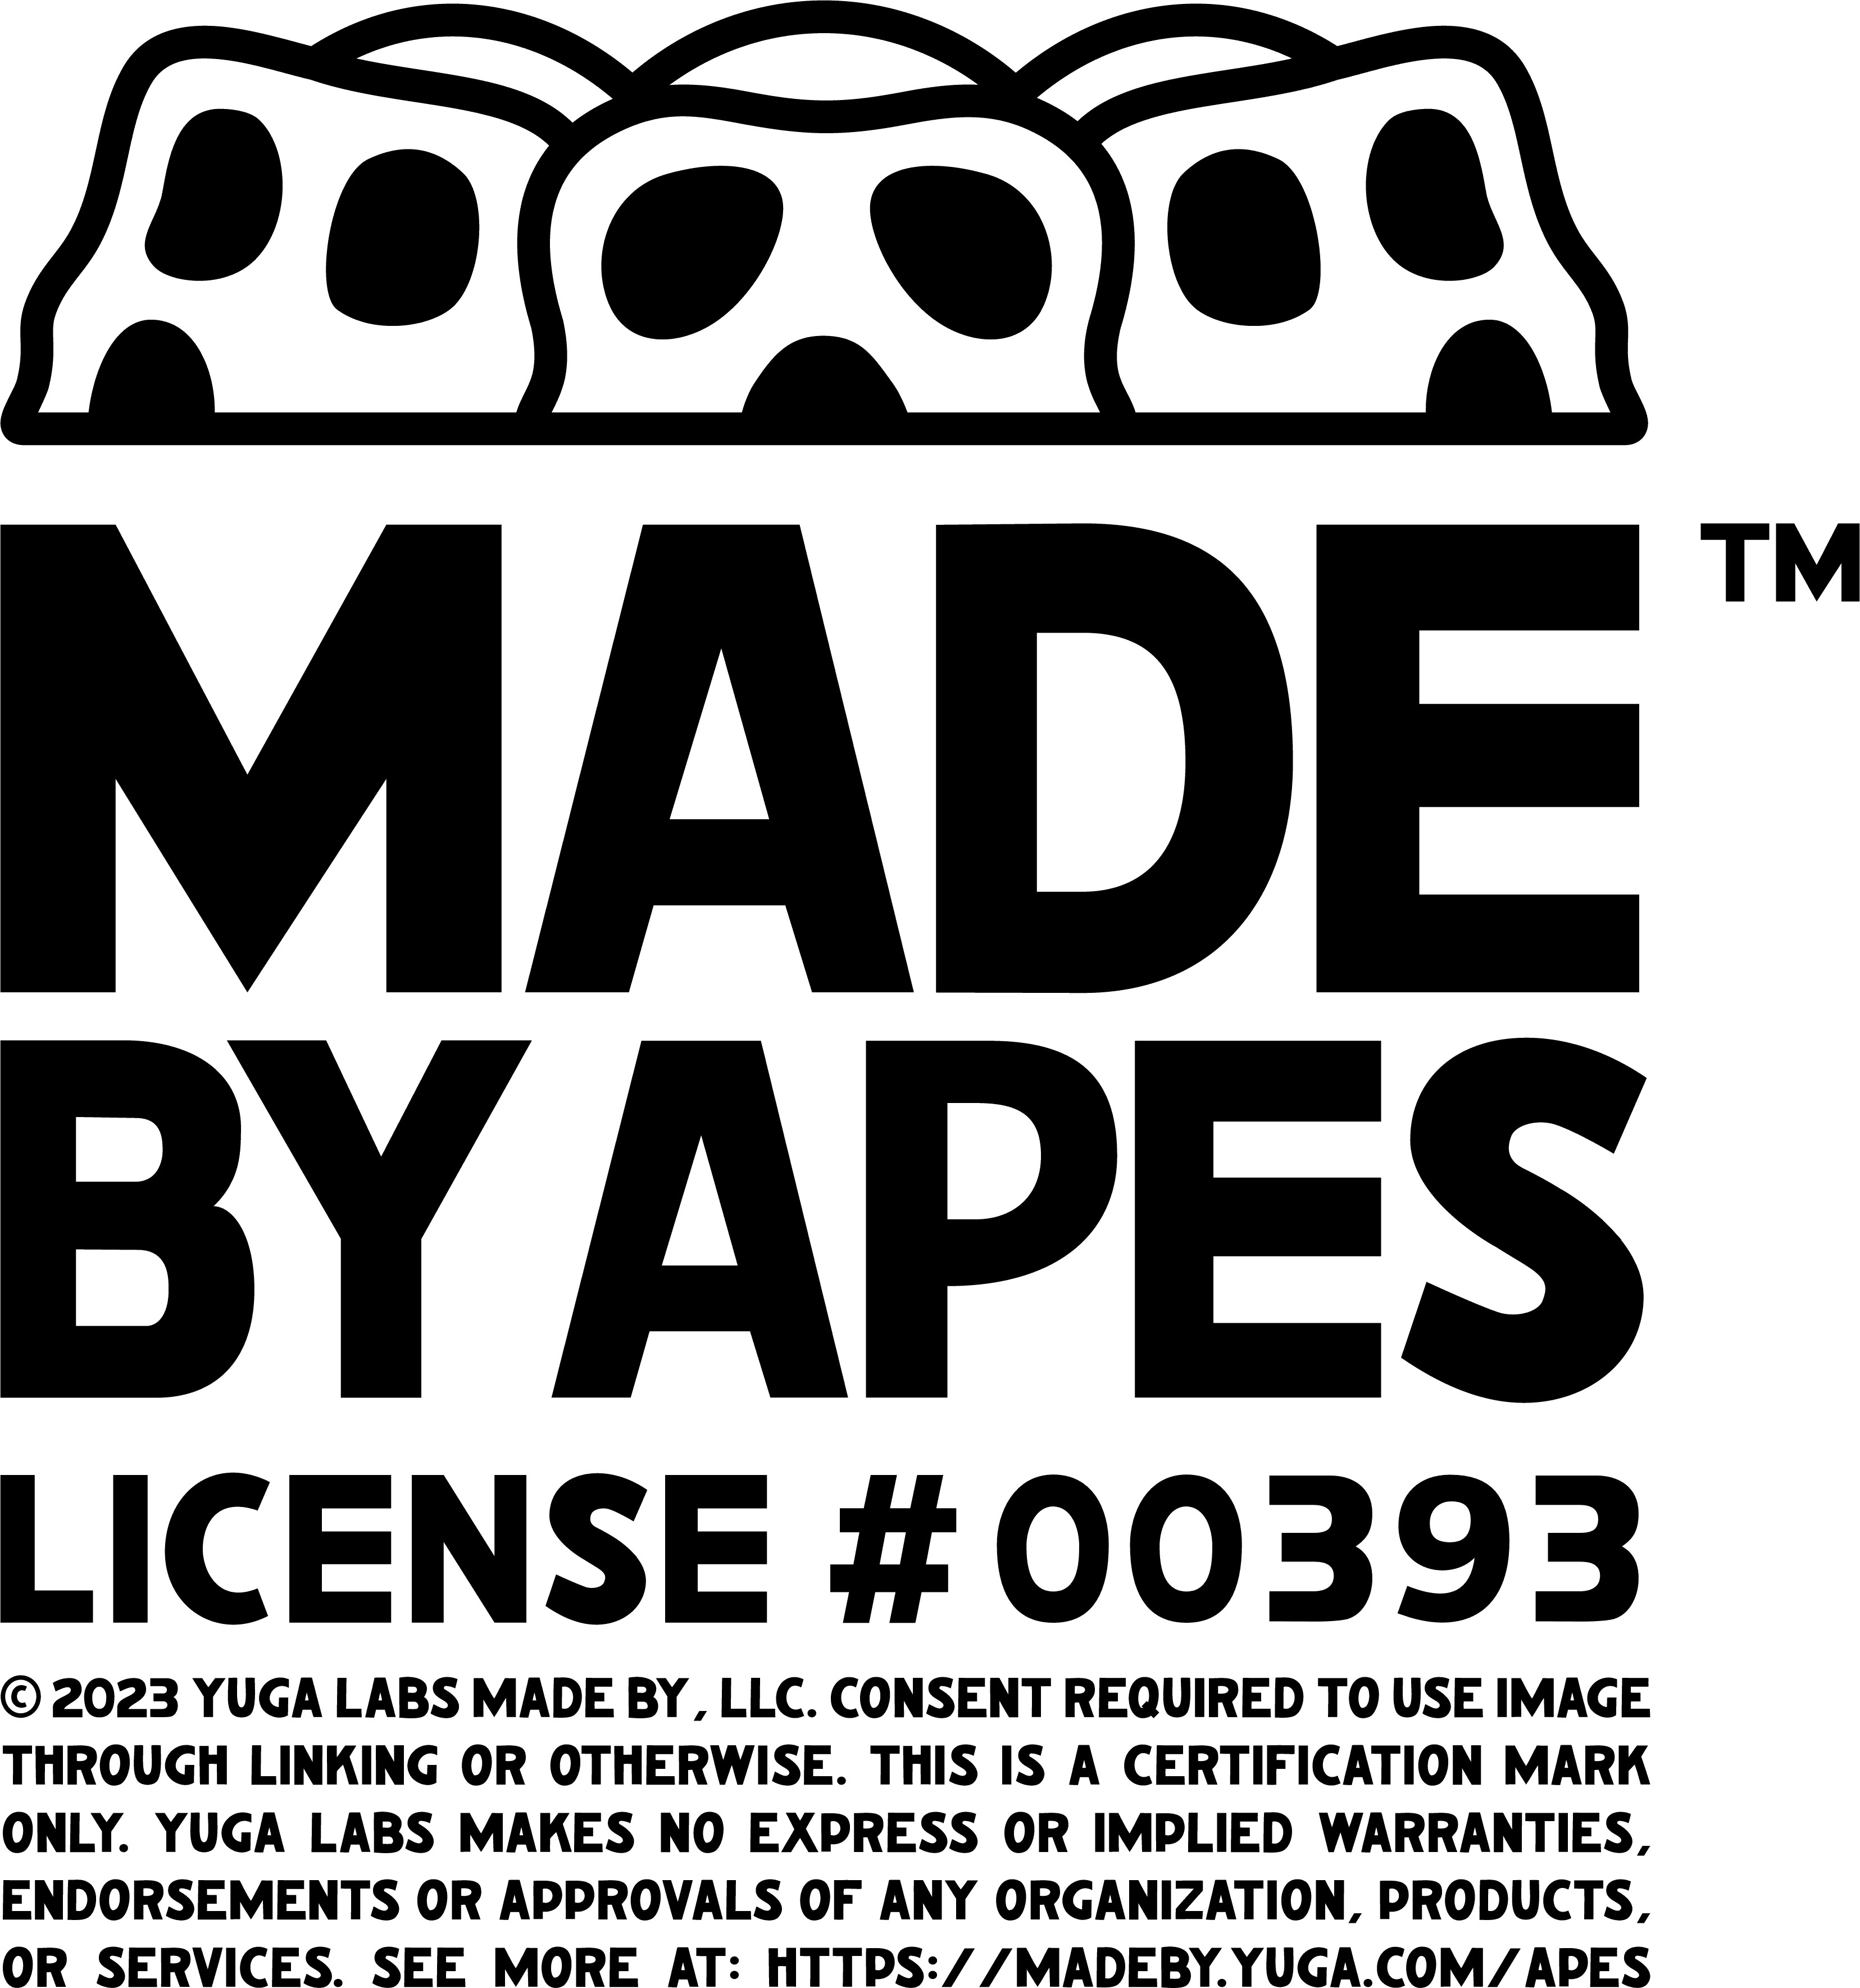 Made By Apes #00393